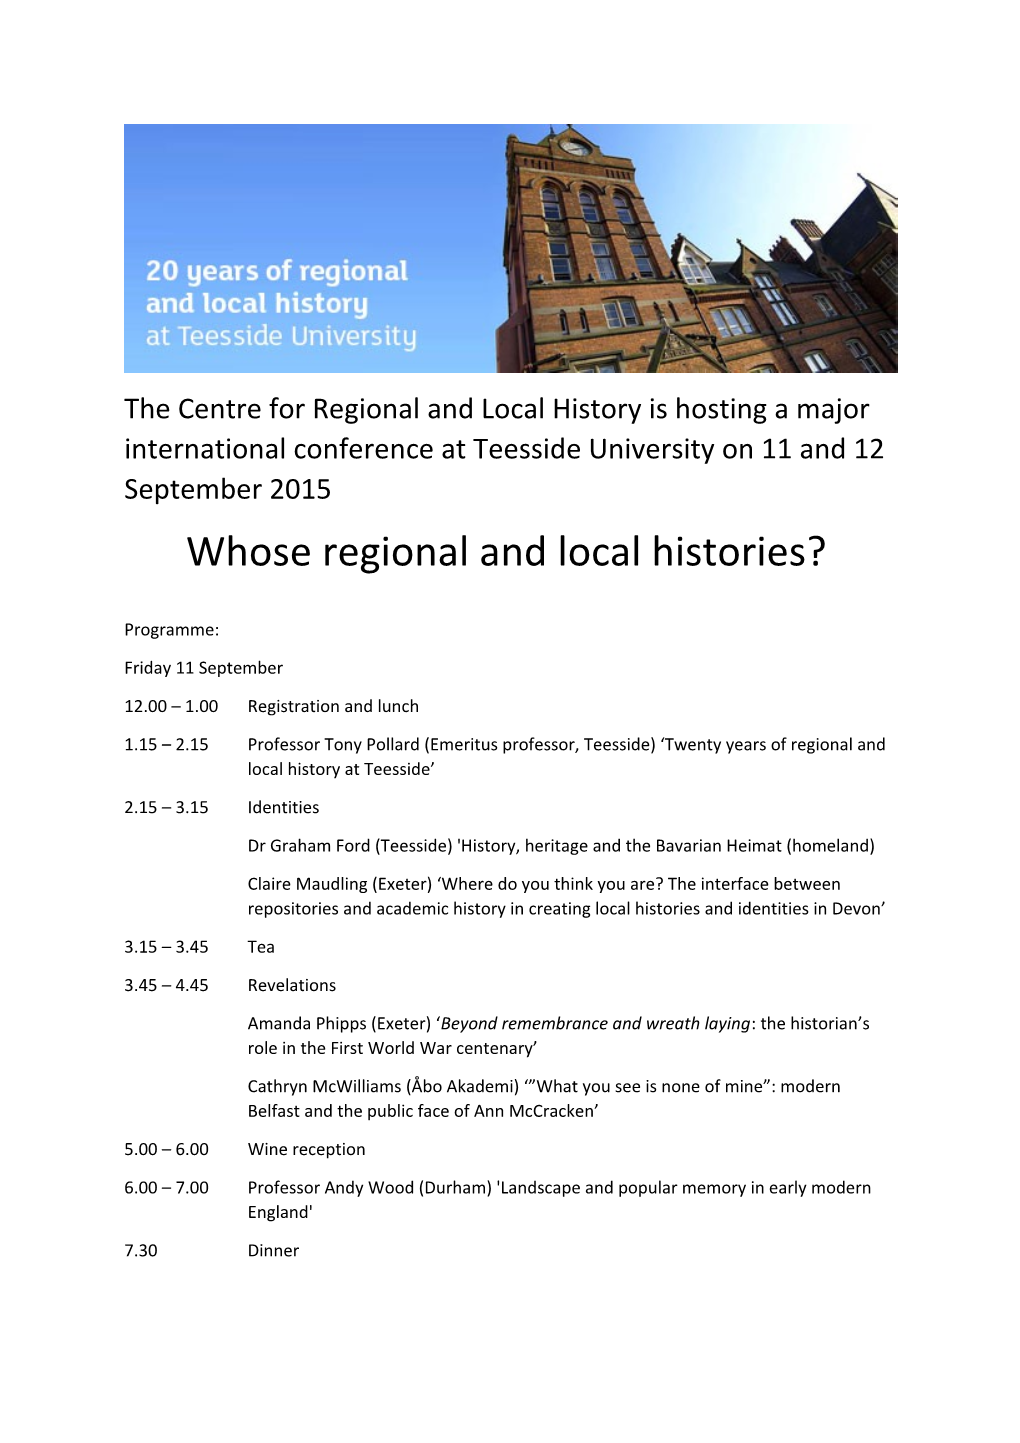 Whose Regional and Local Histories?